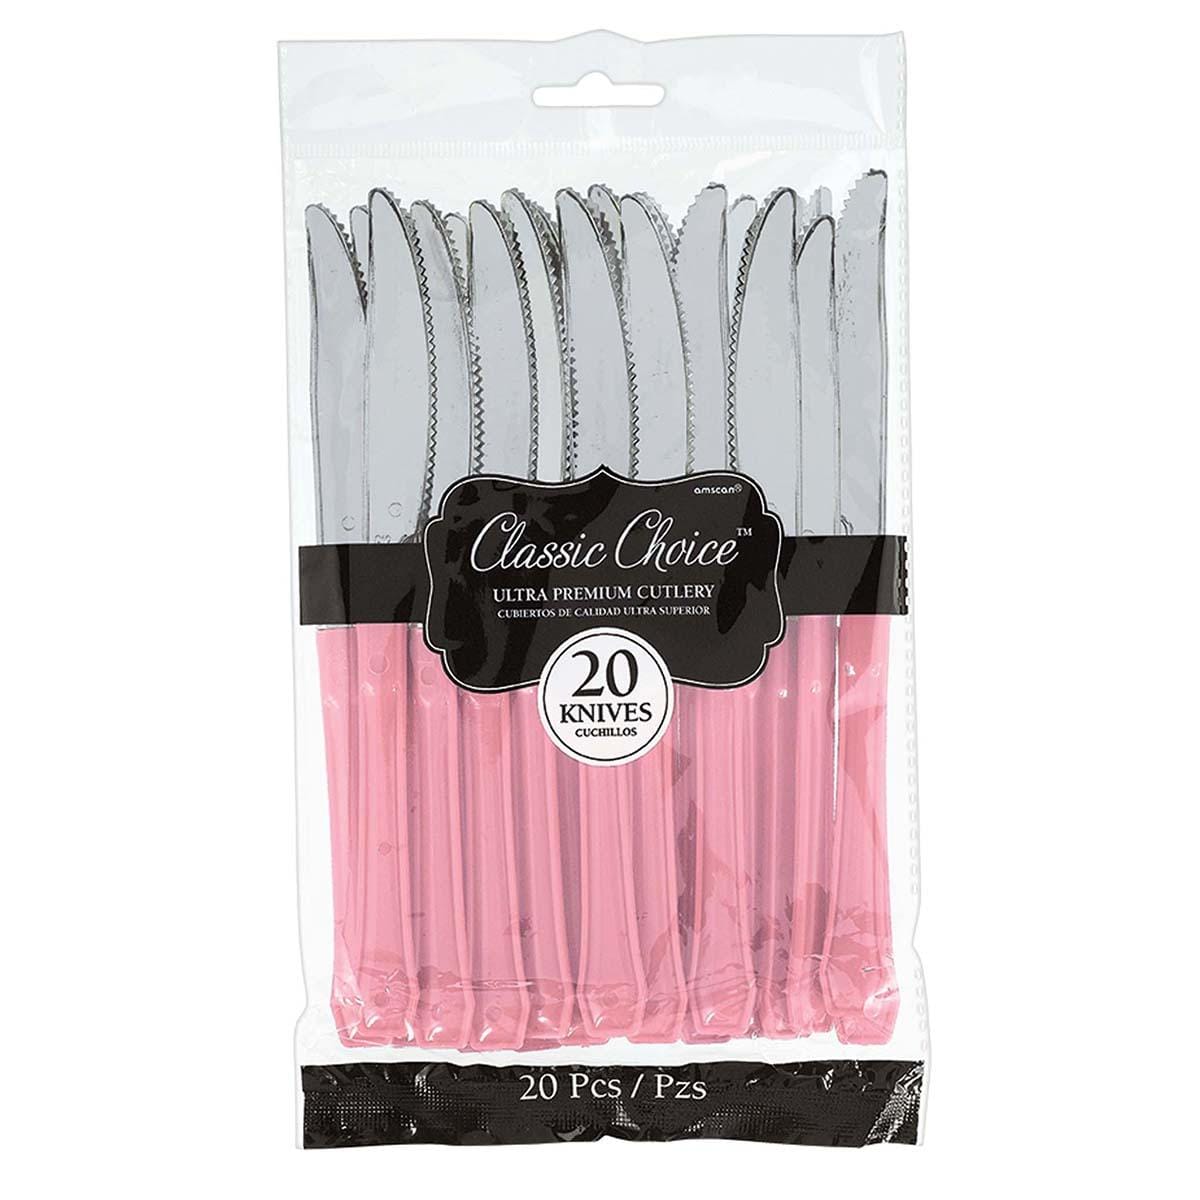 Buy Plasticware Knives Premium 20/pkg. - New Pink sold at Party Expert